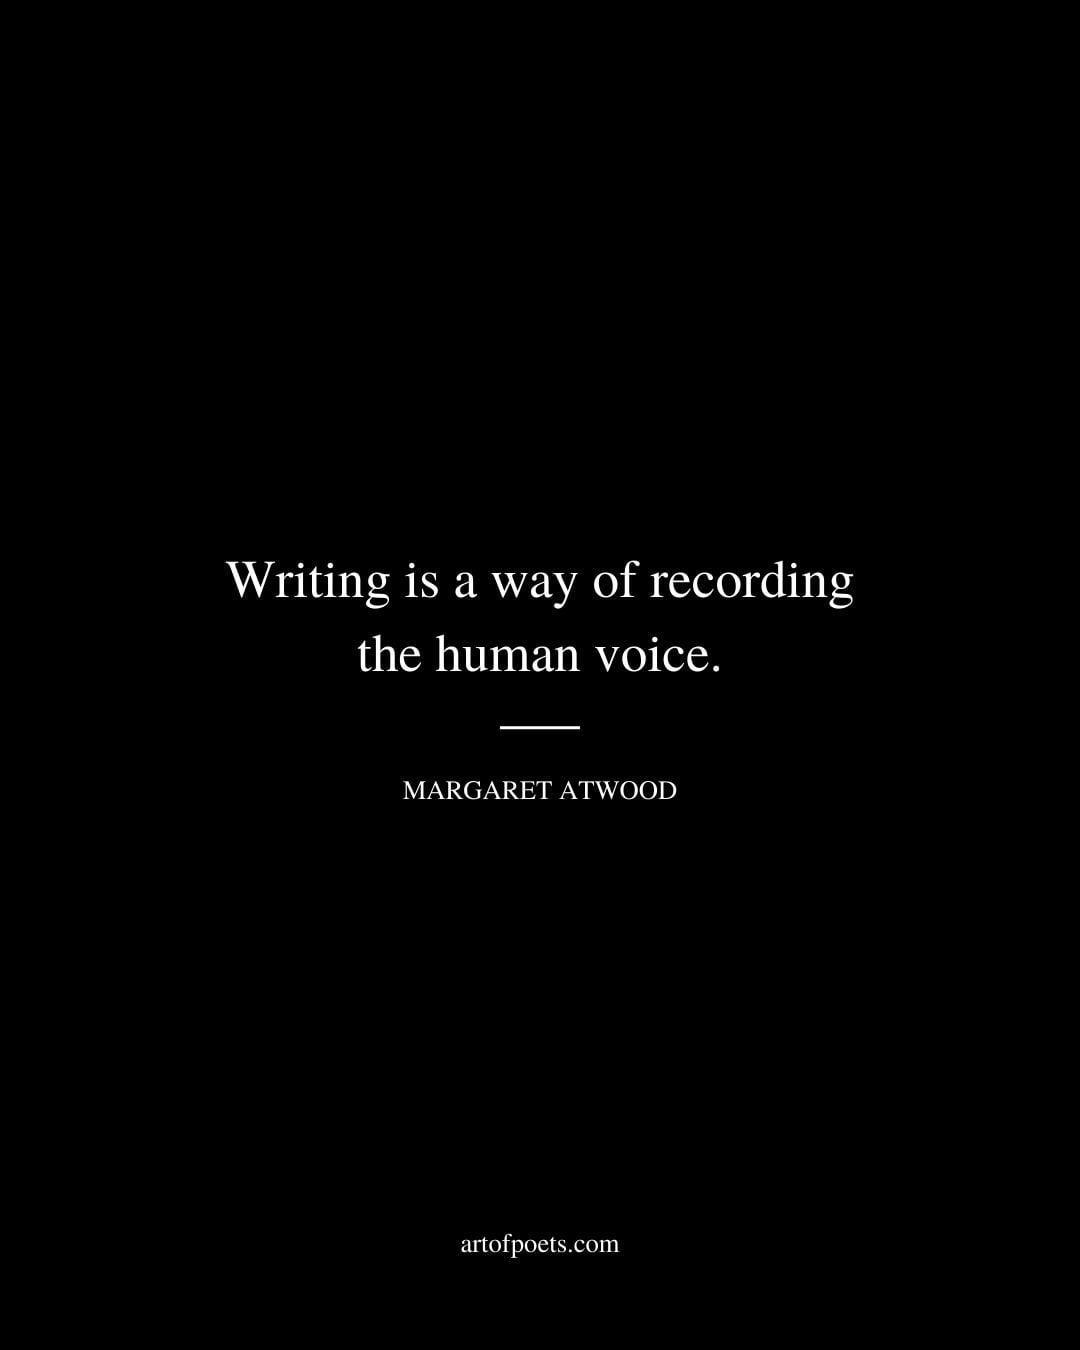 Writing is a way of recording the human voice. — Margaret Atwood